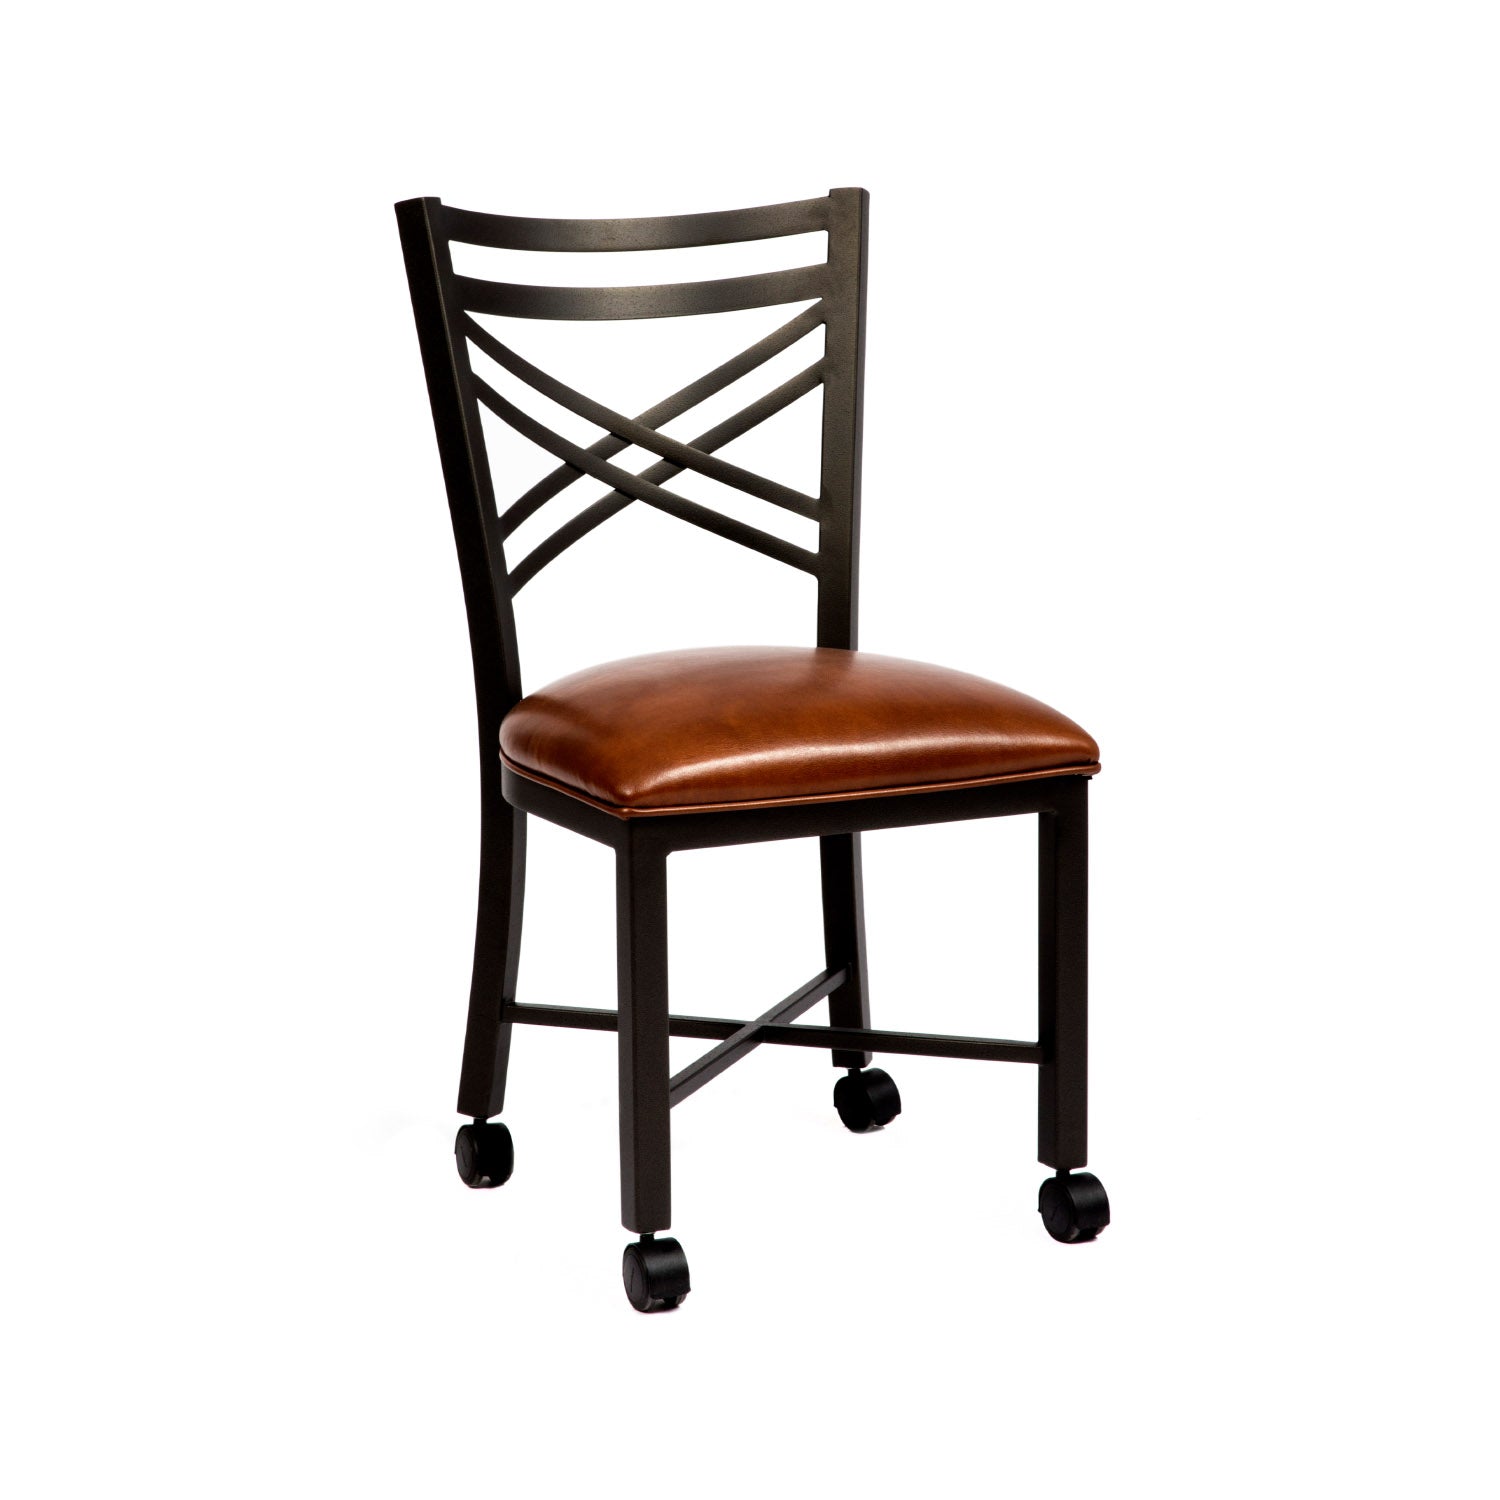 Wesley Allen Raleigh Chair with Yosemite Chestnut Vinyl and a Matte Black Finish with Casters.